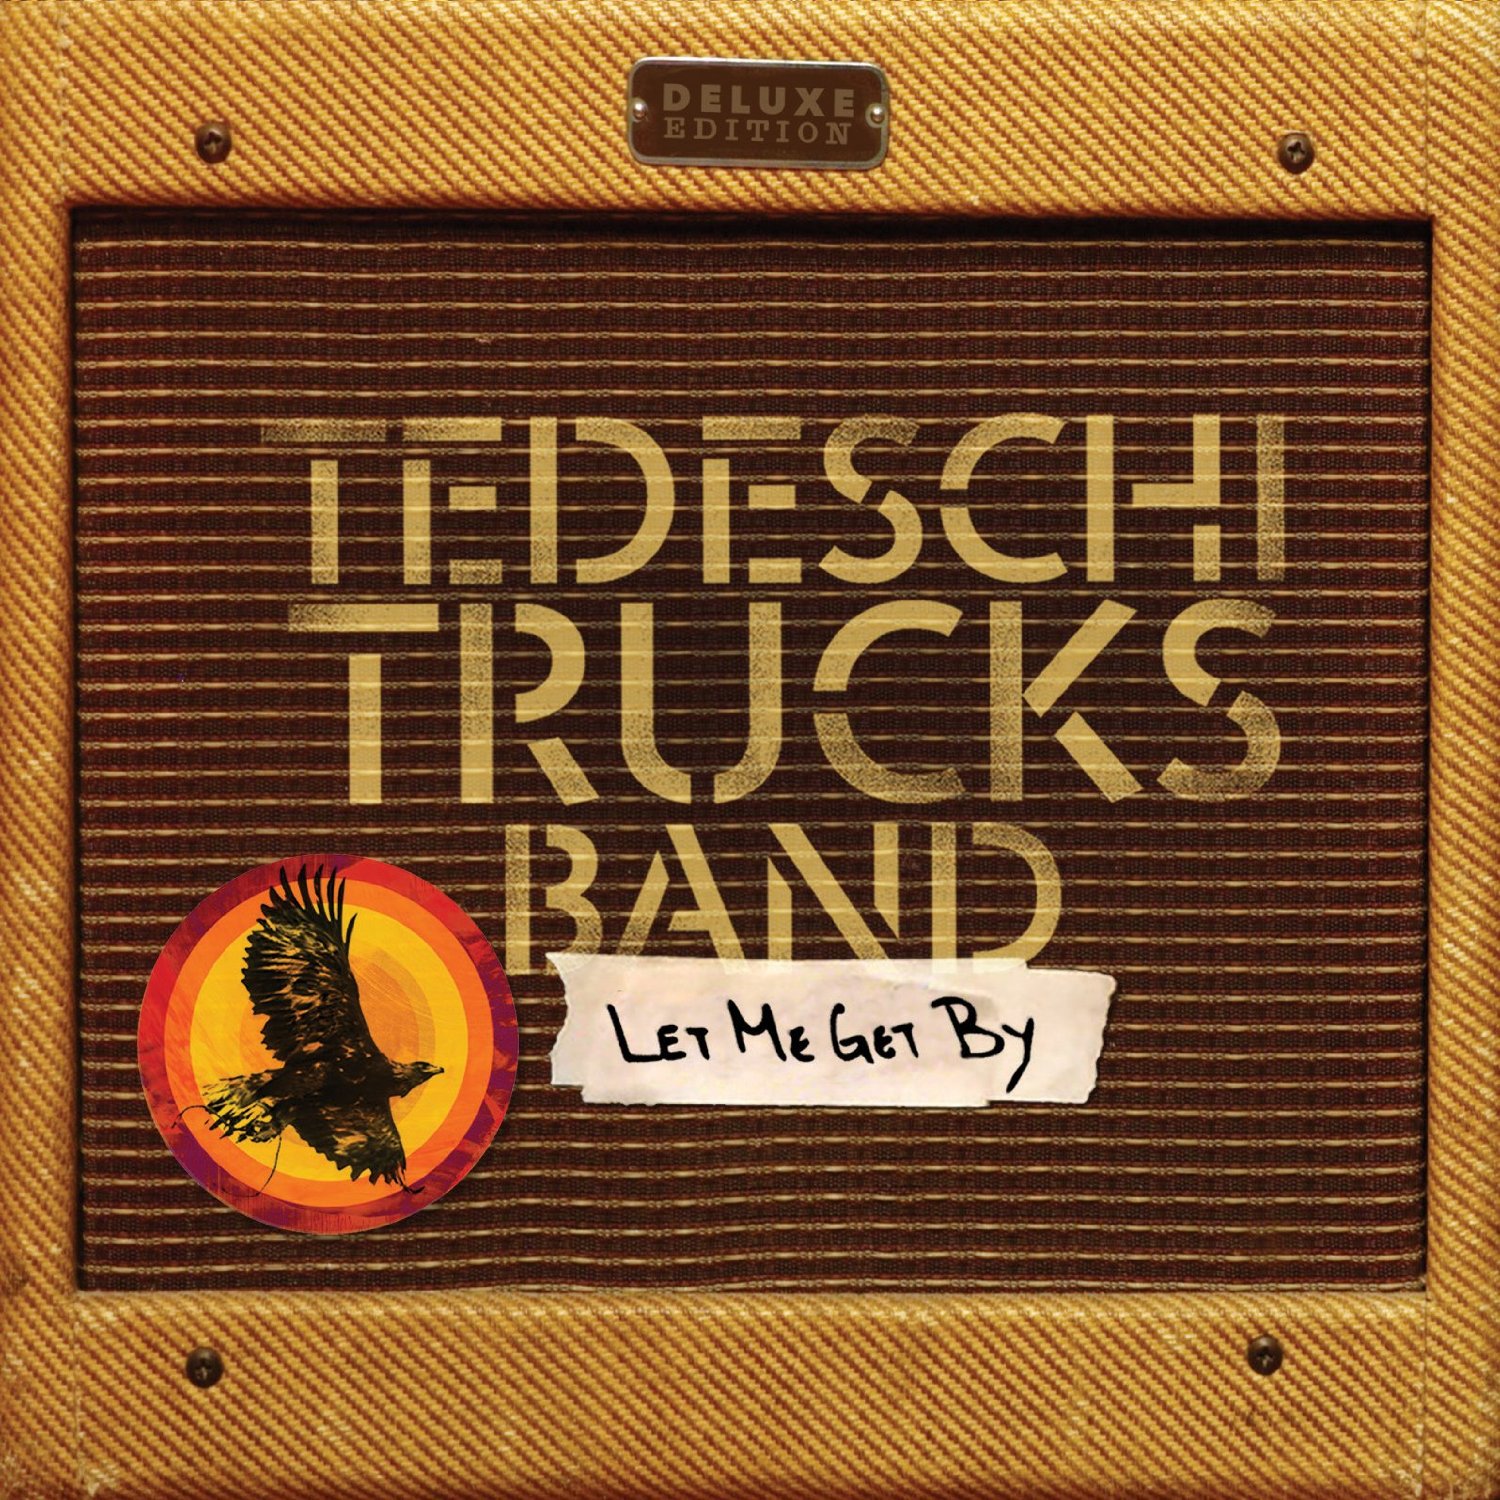 Tedeschi Trucks Band - Let Me Get By {Deluxe Edition} (2016) [HDTracks FLAC 24bit/88,2kHz]